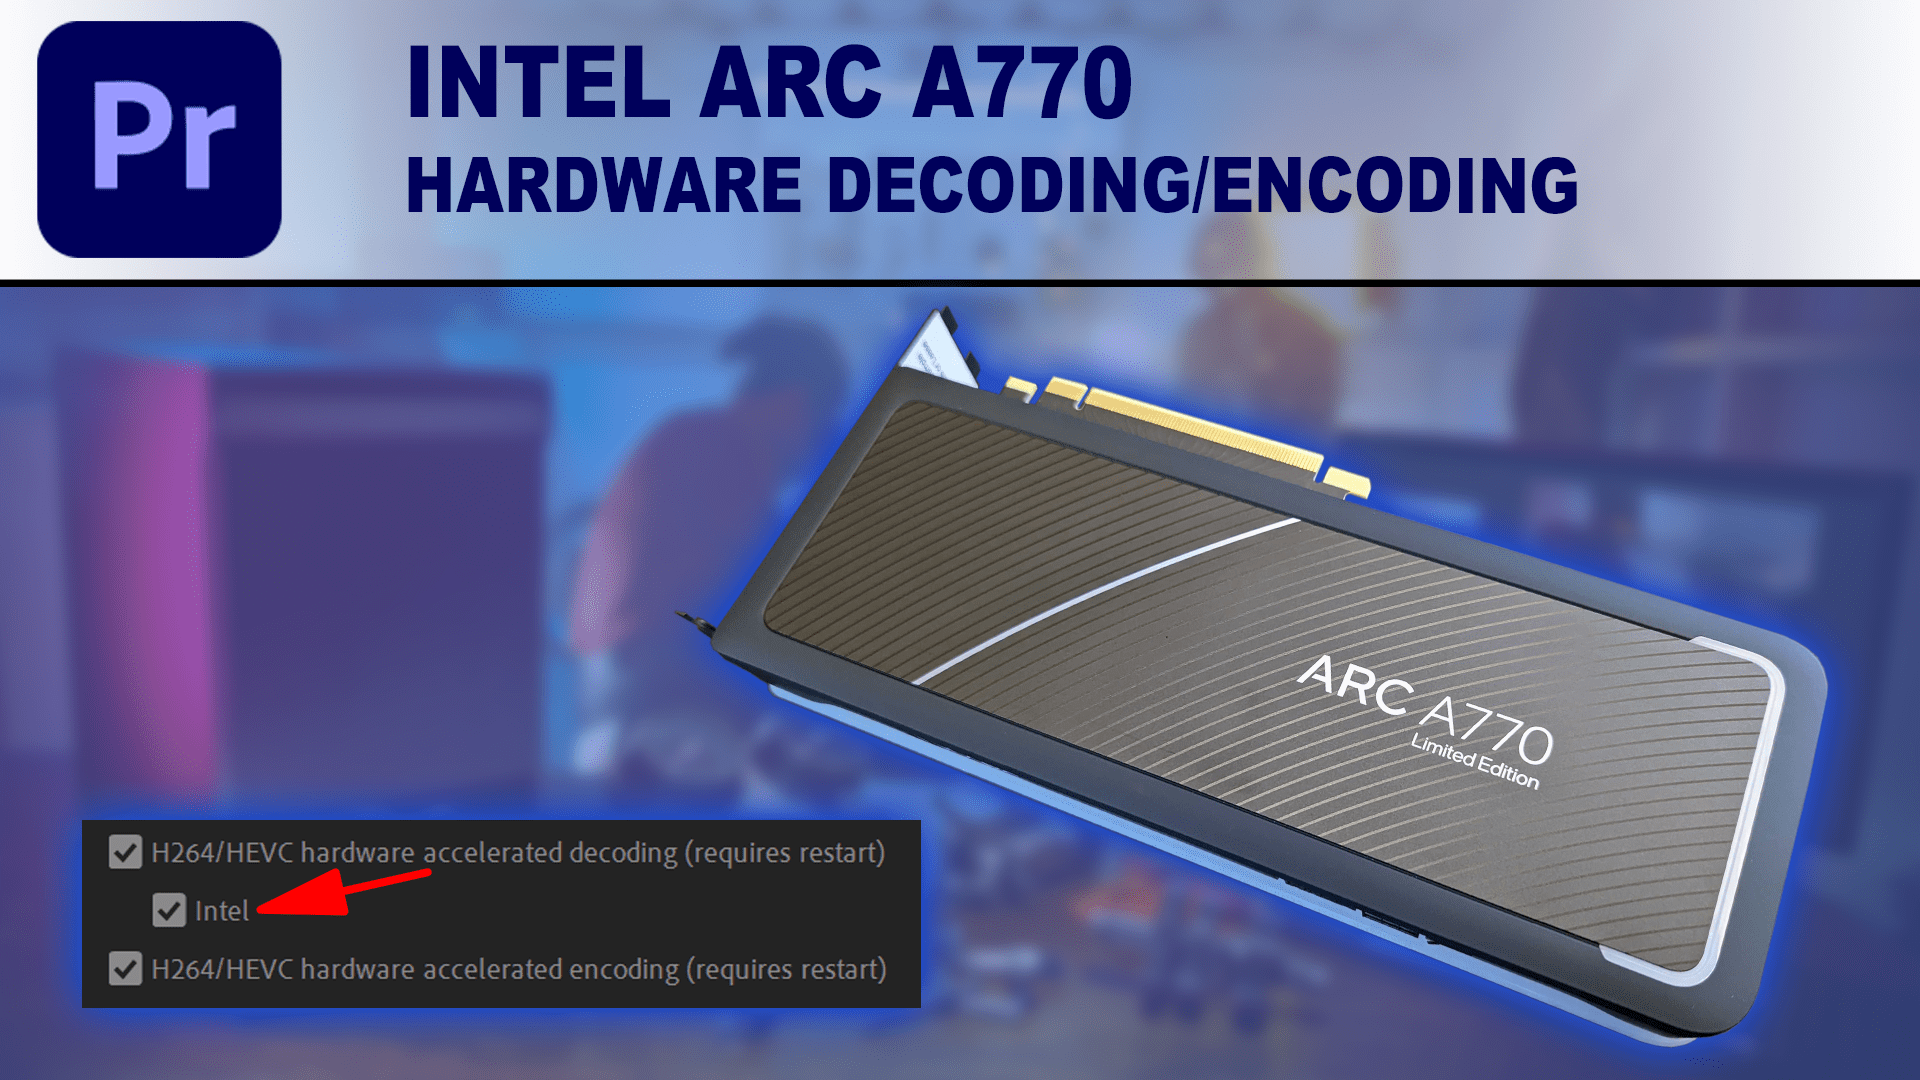 Intel Arc A770 hardware decoding and encoding support in Premiere Pro